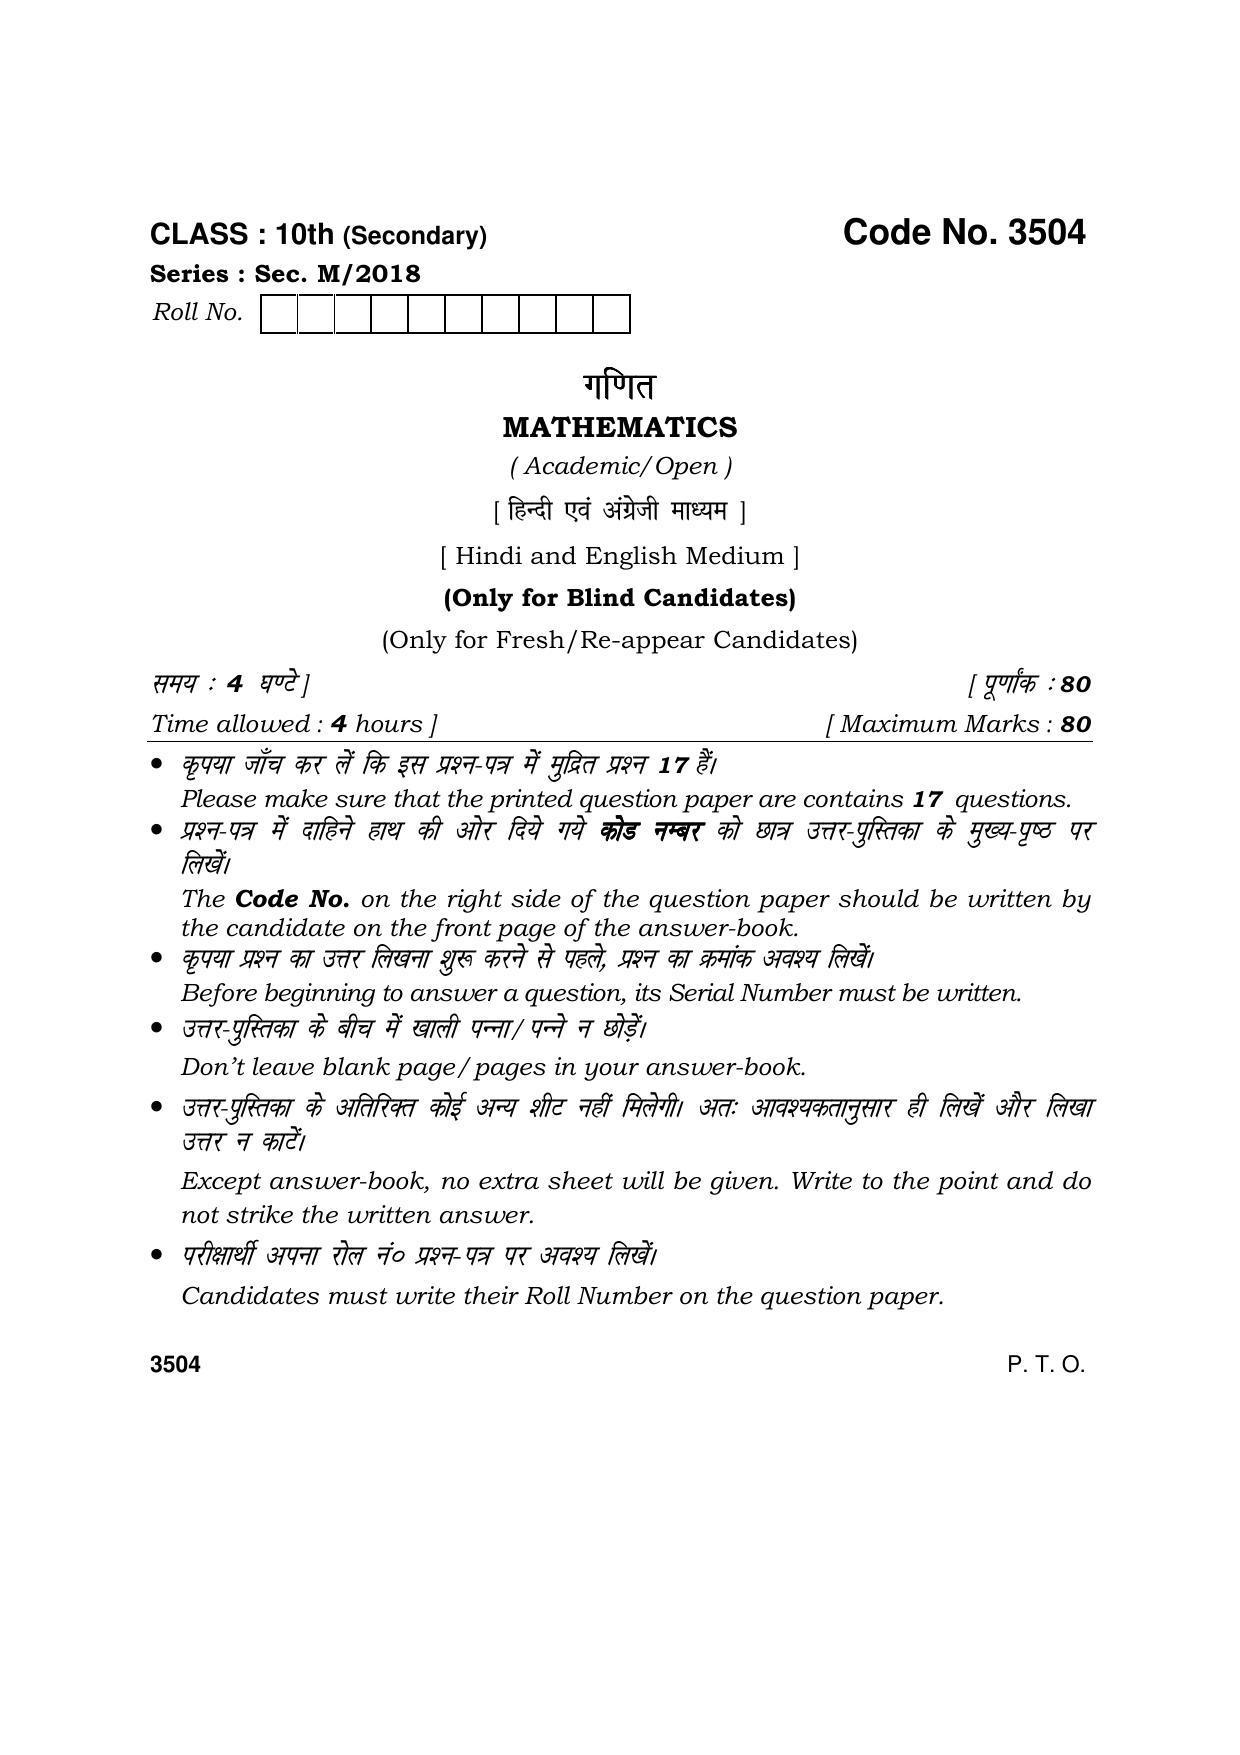 Haryana Board HBSE Class 10 Mathematics (Blind c) 2018 Question Paper - Page 1